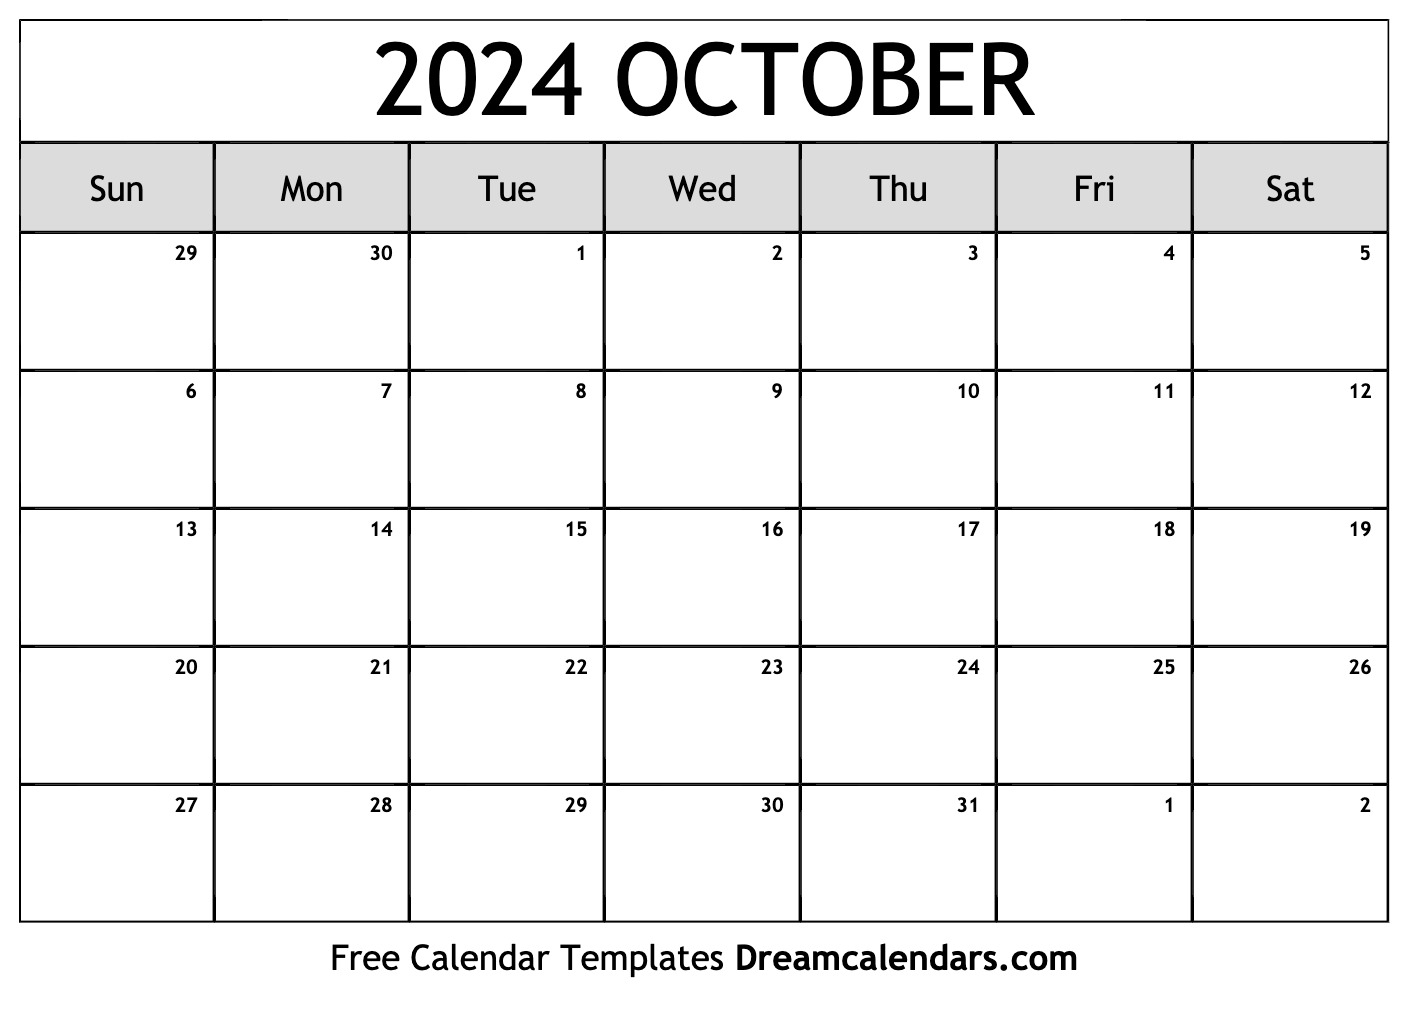 October 2024 Calendar | Free Blank Printable With Holidays for Printable Calendar 2024 October